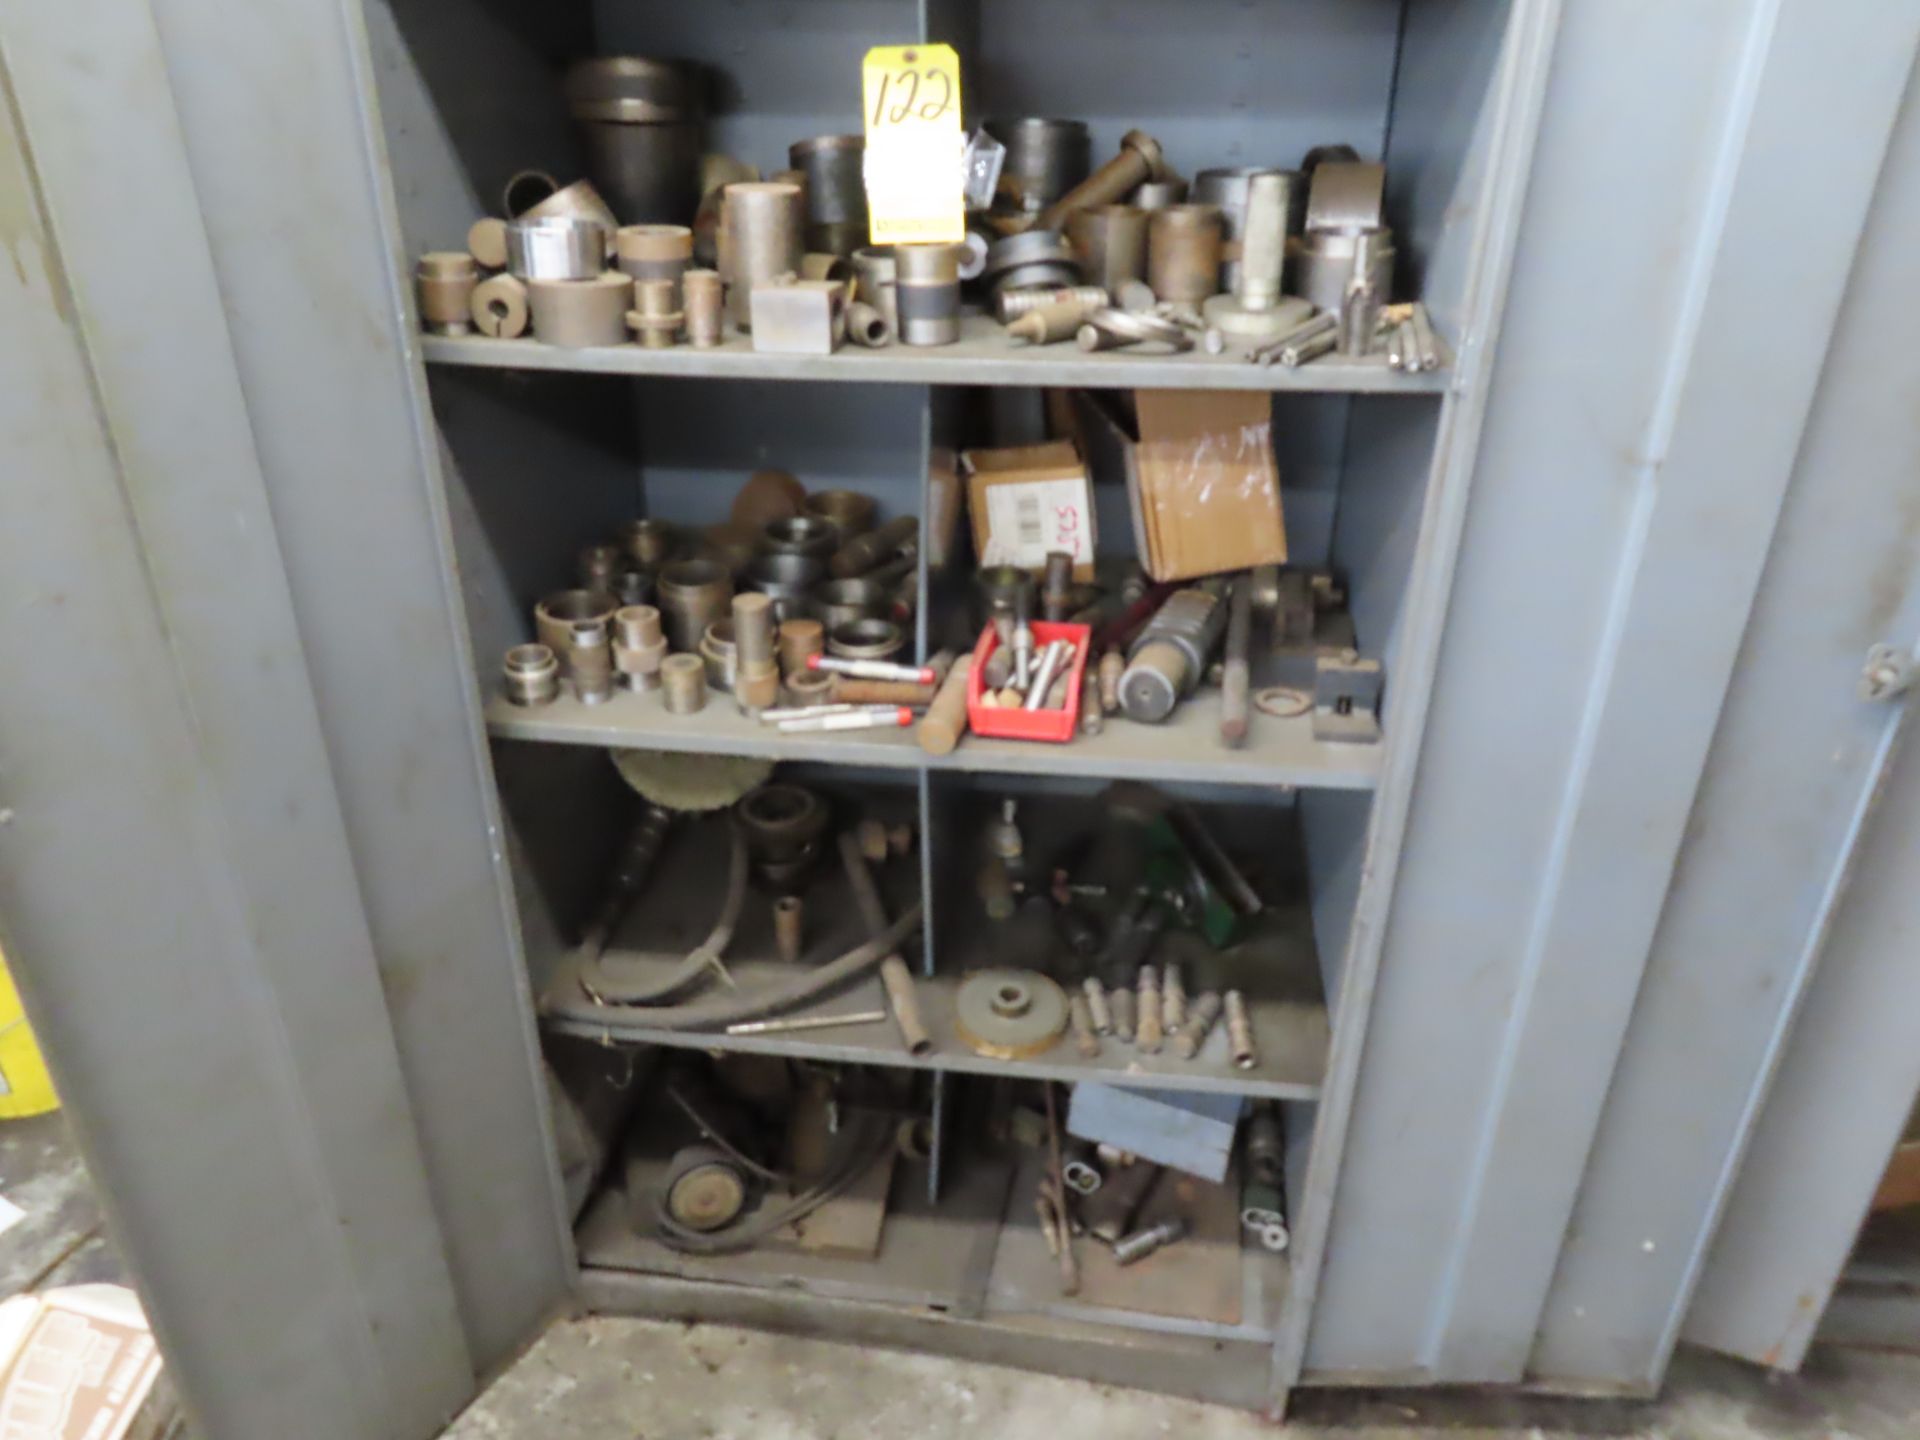 LOT (2) CABINETS W/CONTENTS - MISC. TOOLING, FIXTURES, ETC.BLDG: 1 - LOT (2) CABINETS W/CONTENTS - M